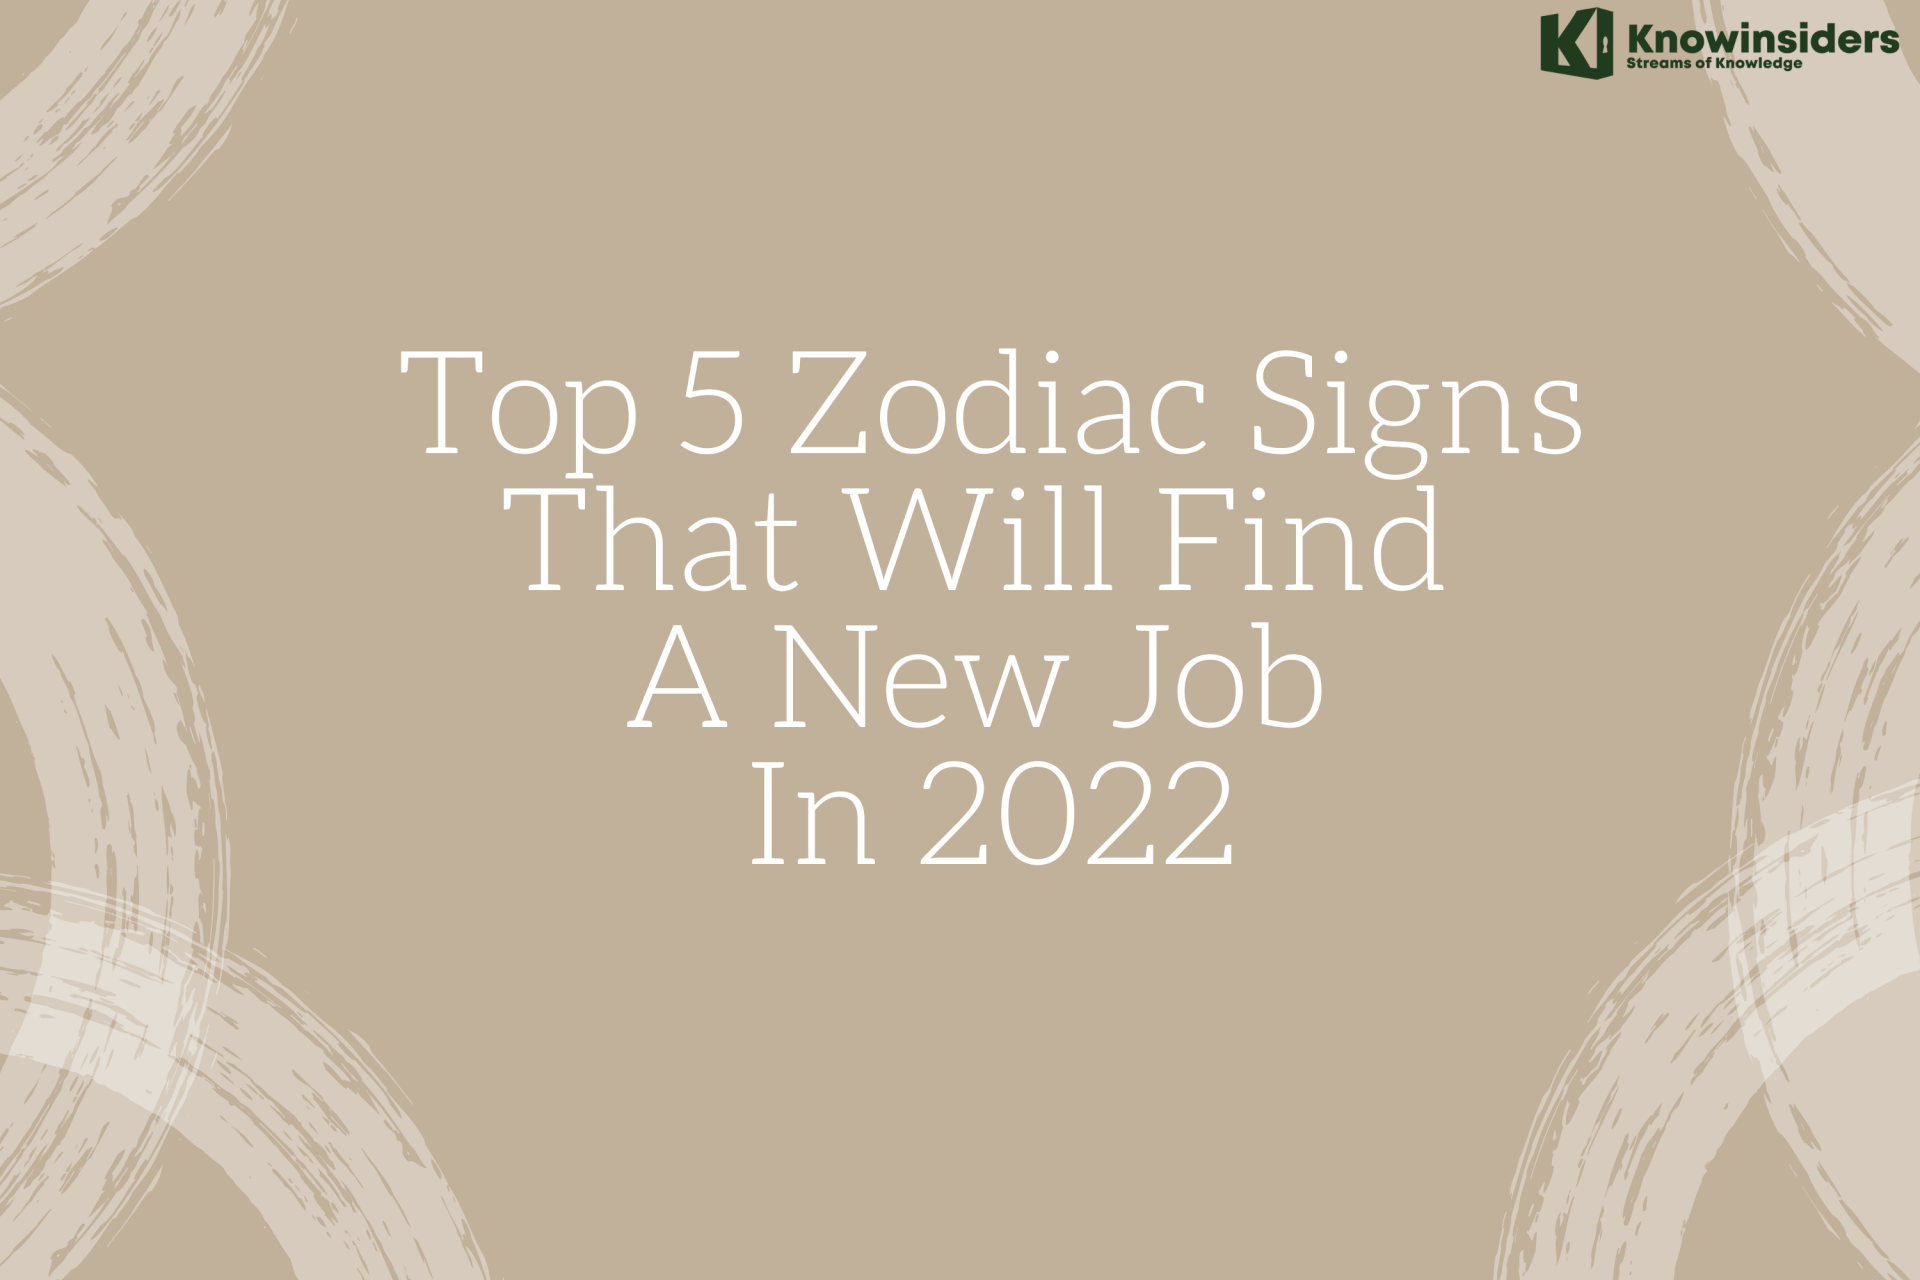 Top 5 Zodiac Signs That Will Find A New Job In 2022